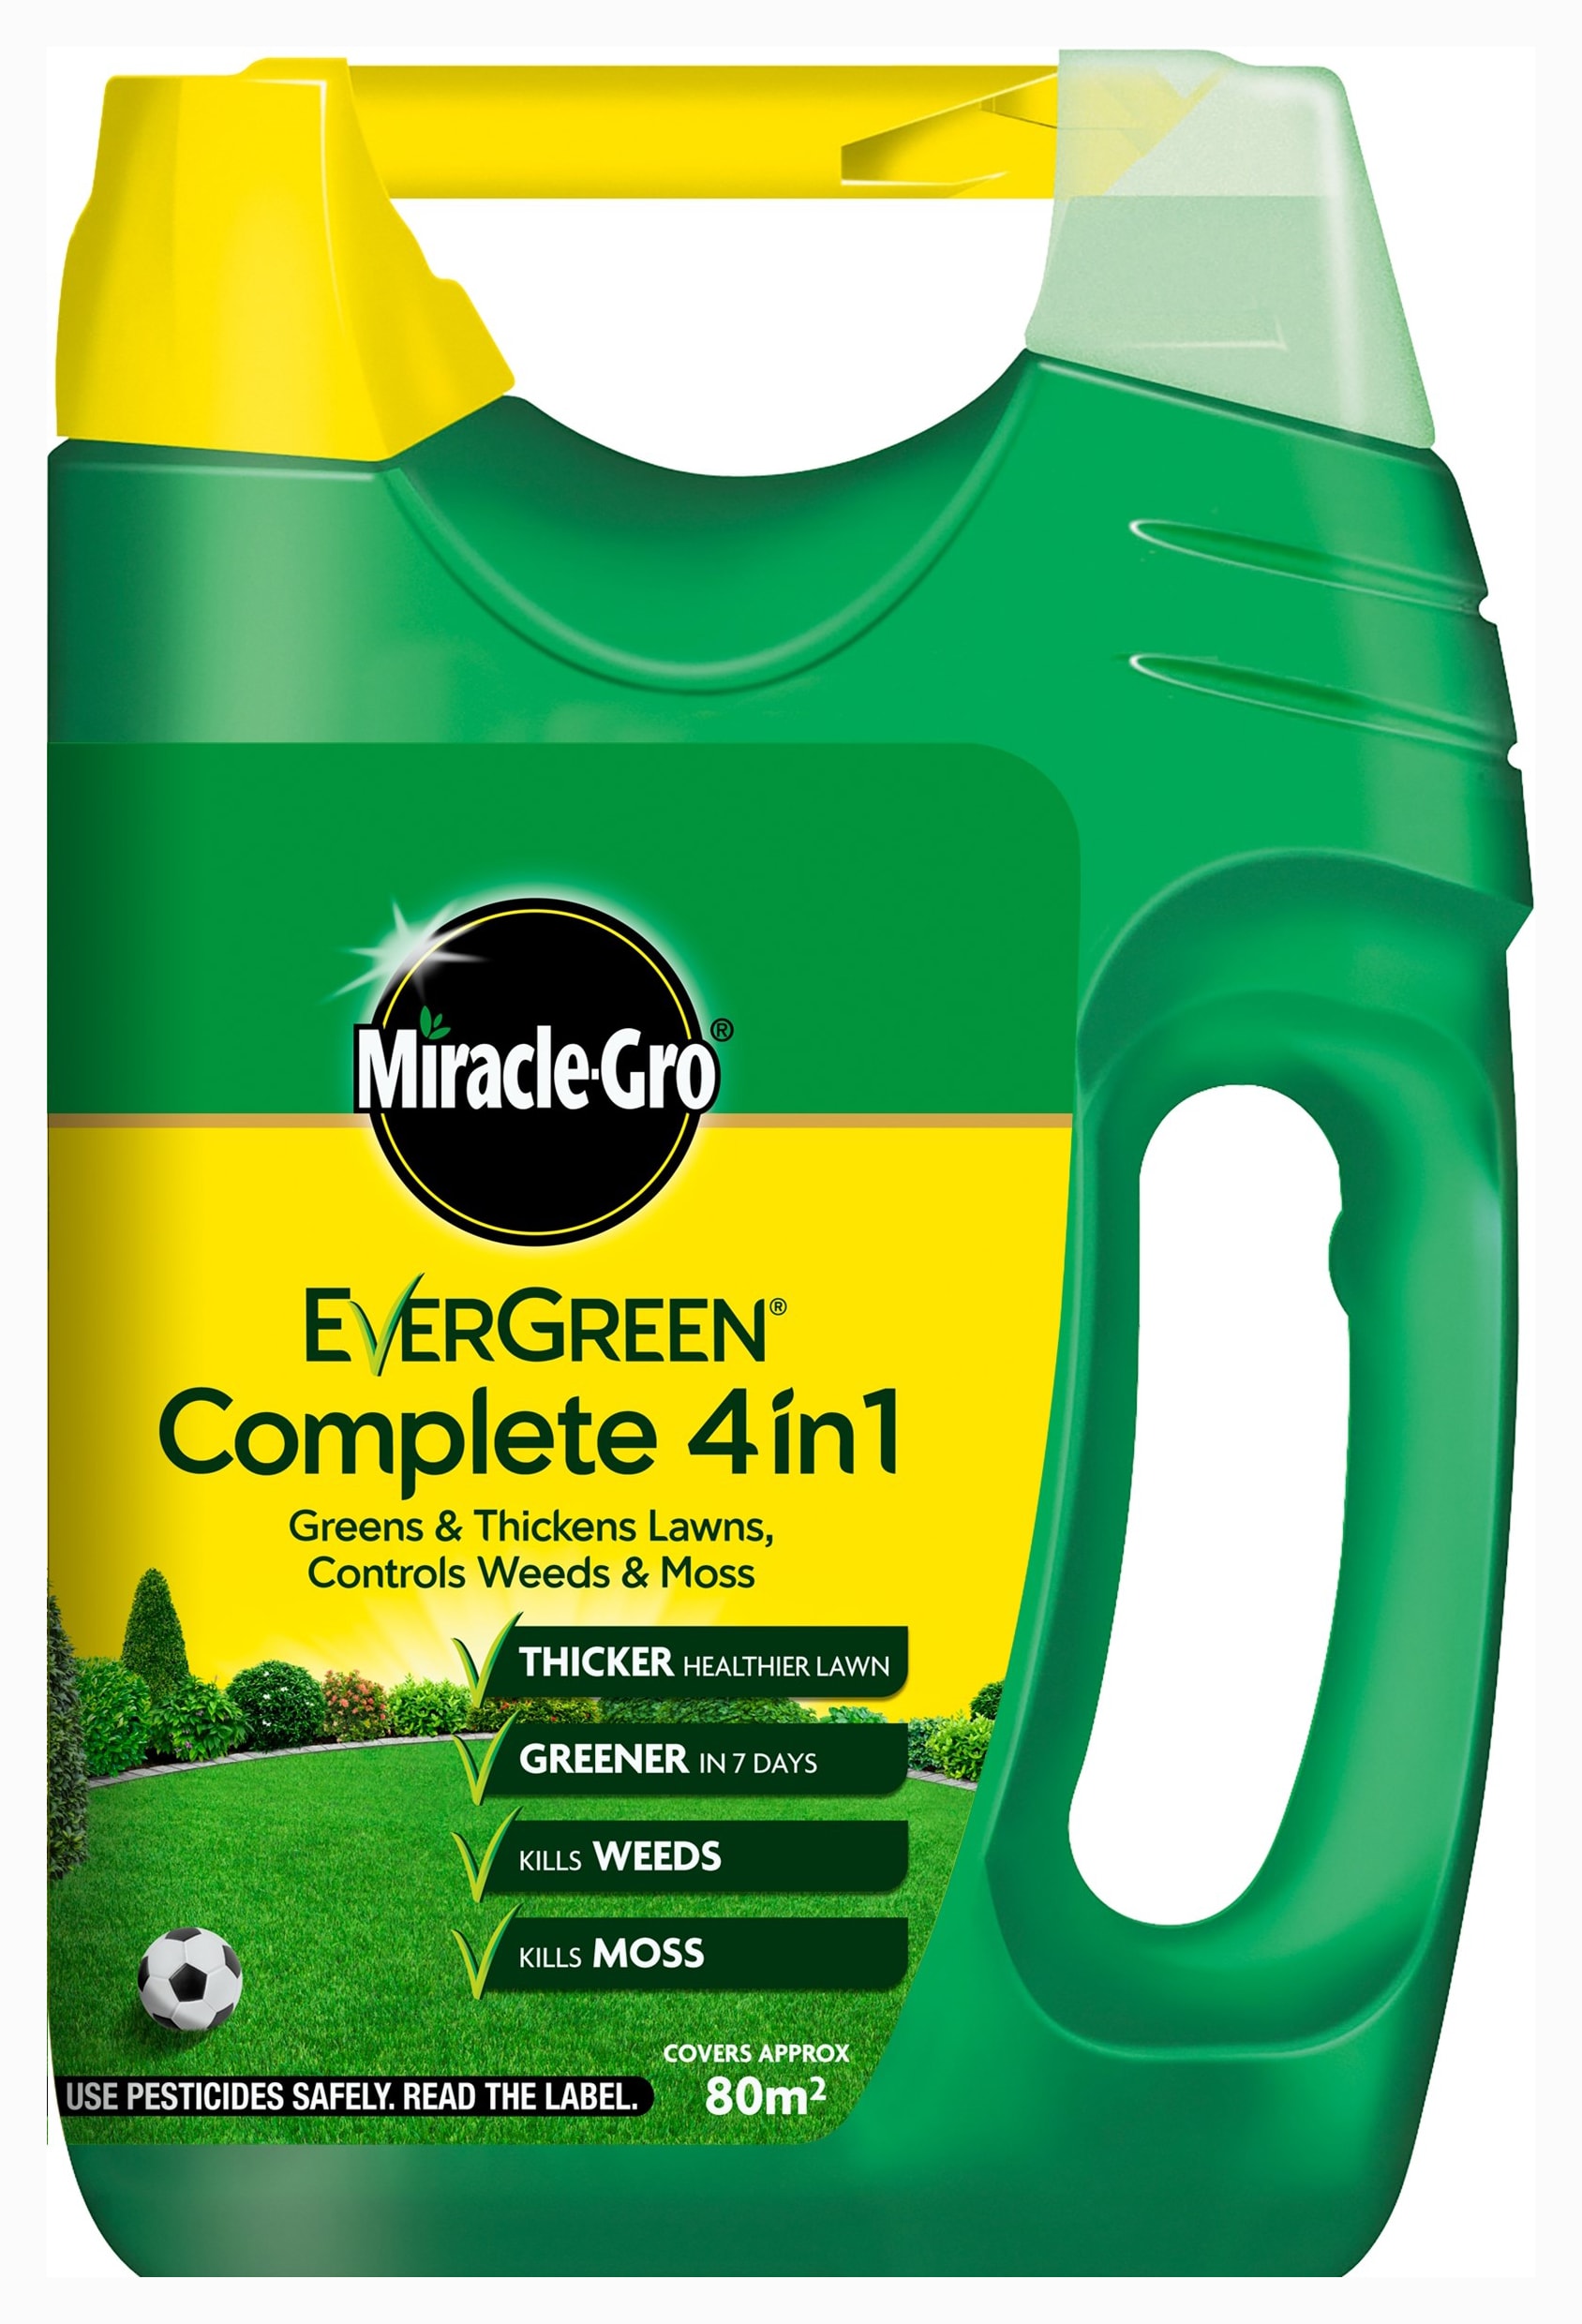 Miracle-Gro Complete 4in1 Spreader - 80m2